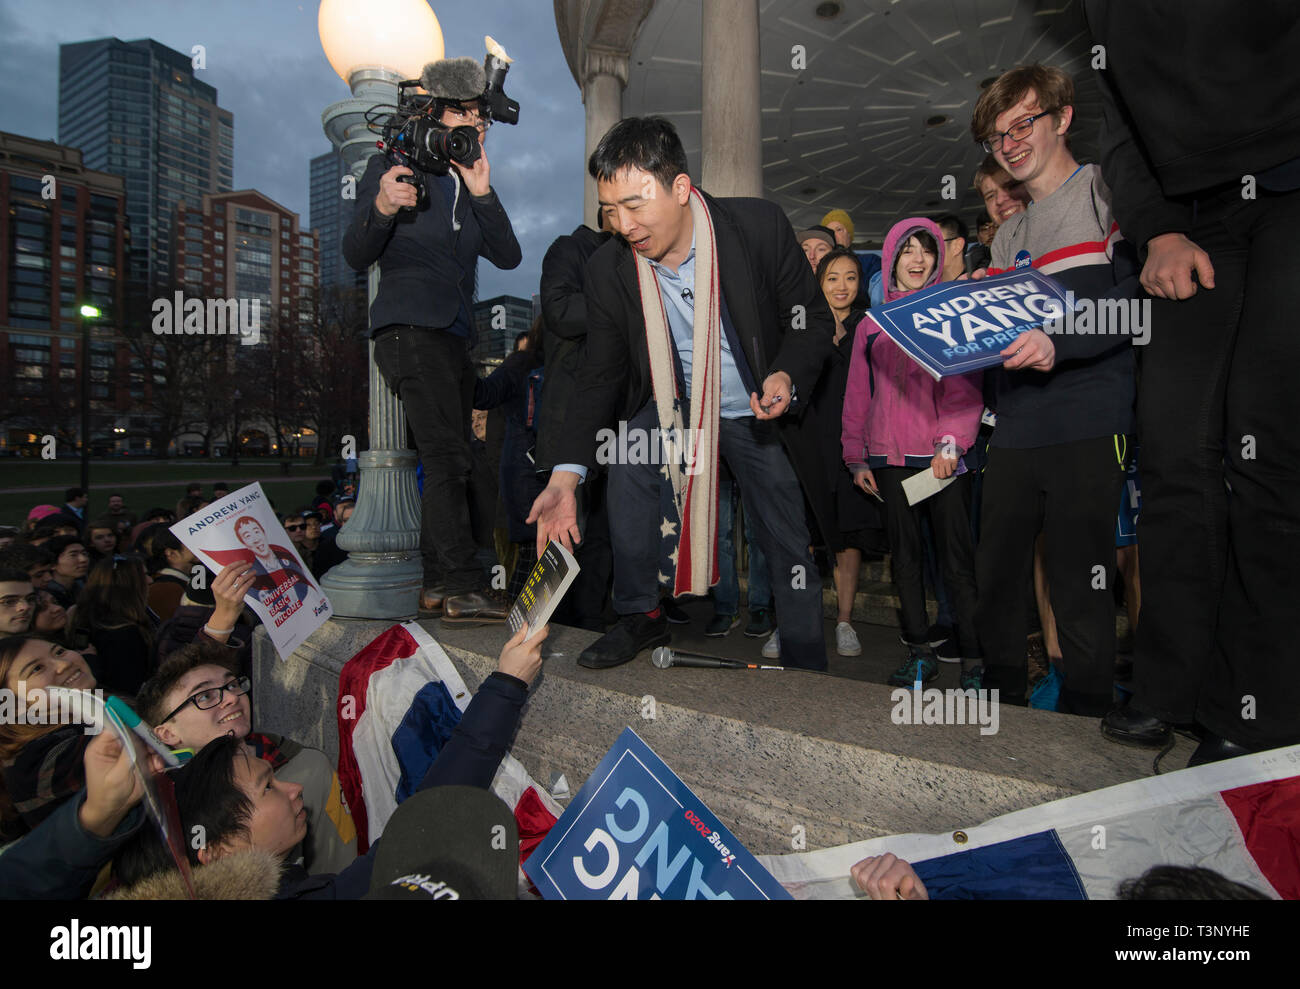 Boston, USA. 10th Apr, 2019. Boston, MA, USA. YANG 2020 American presidential campaign rally at the Parkman Bandstand on the Boston Common. More than 1,000 supporters of Andrew Yang gathered to meet and hear Democratic candidate Yang speak at the Boston Common. Photo shows Yang, who has authored several books signing books and posters after the event. Credit: Chuck Nacke/Alamy Live News Stock Photo